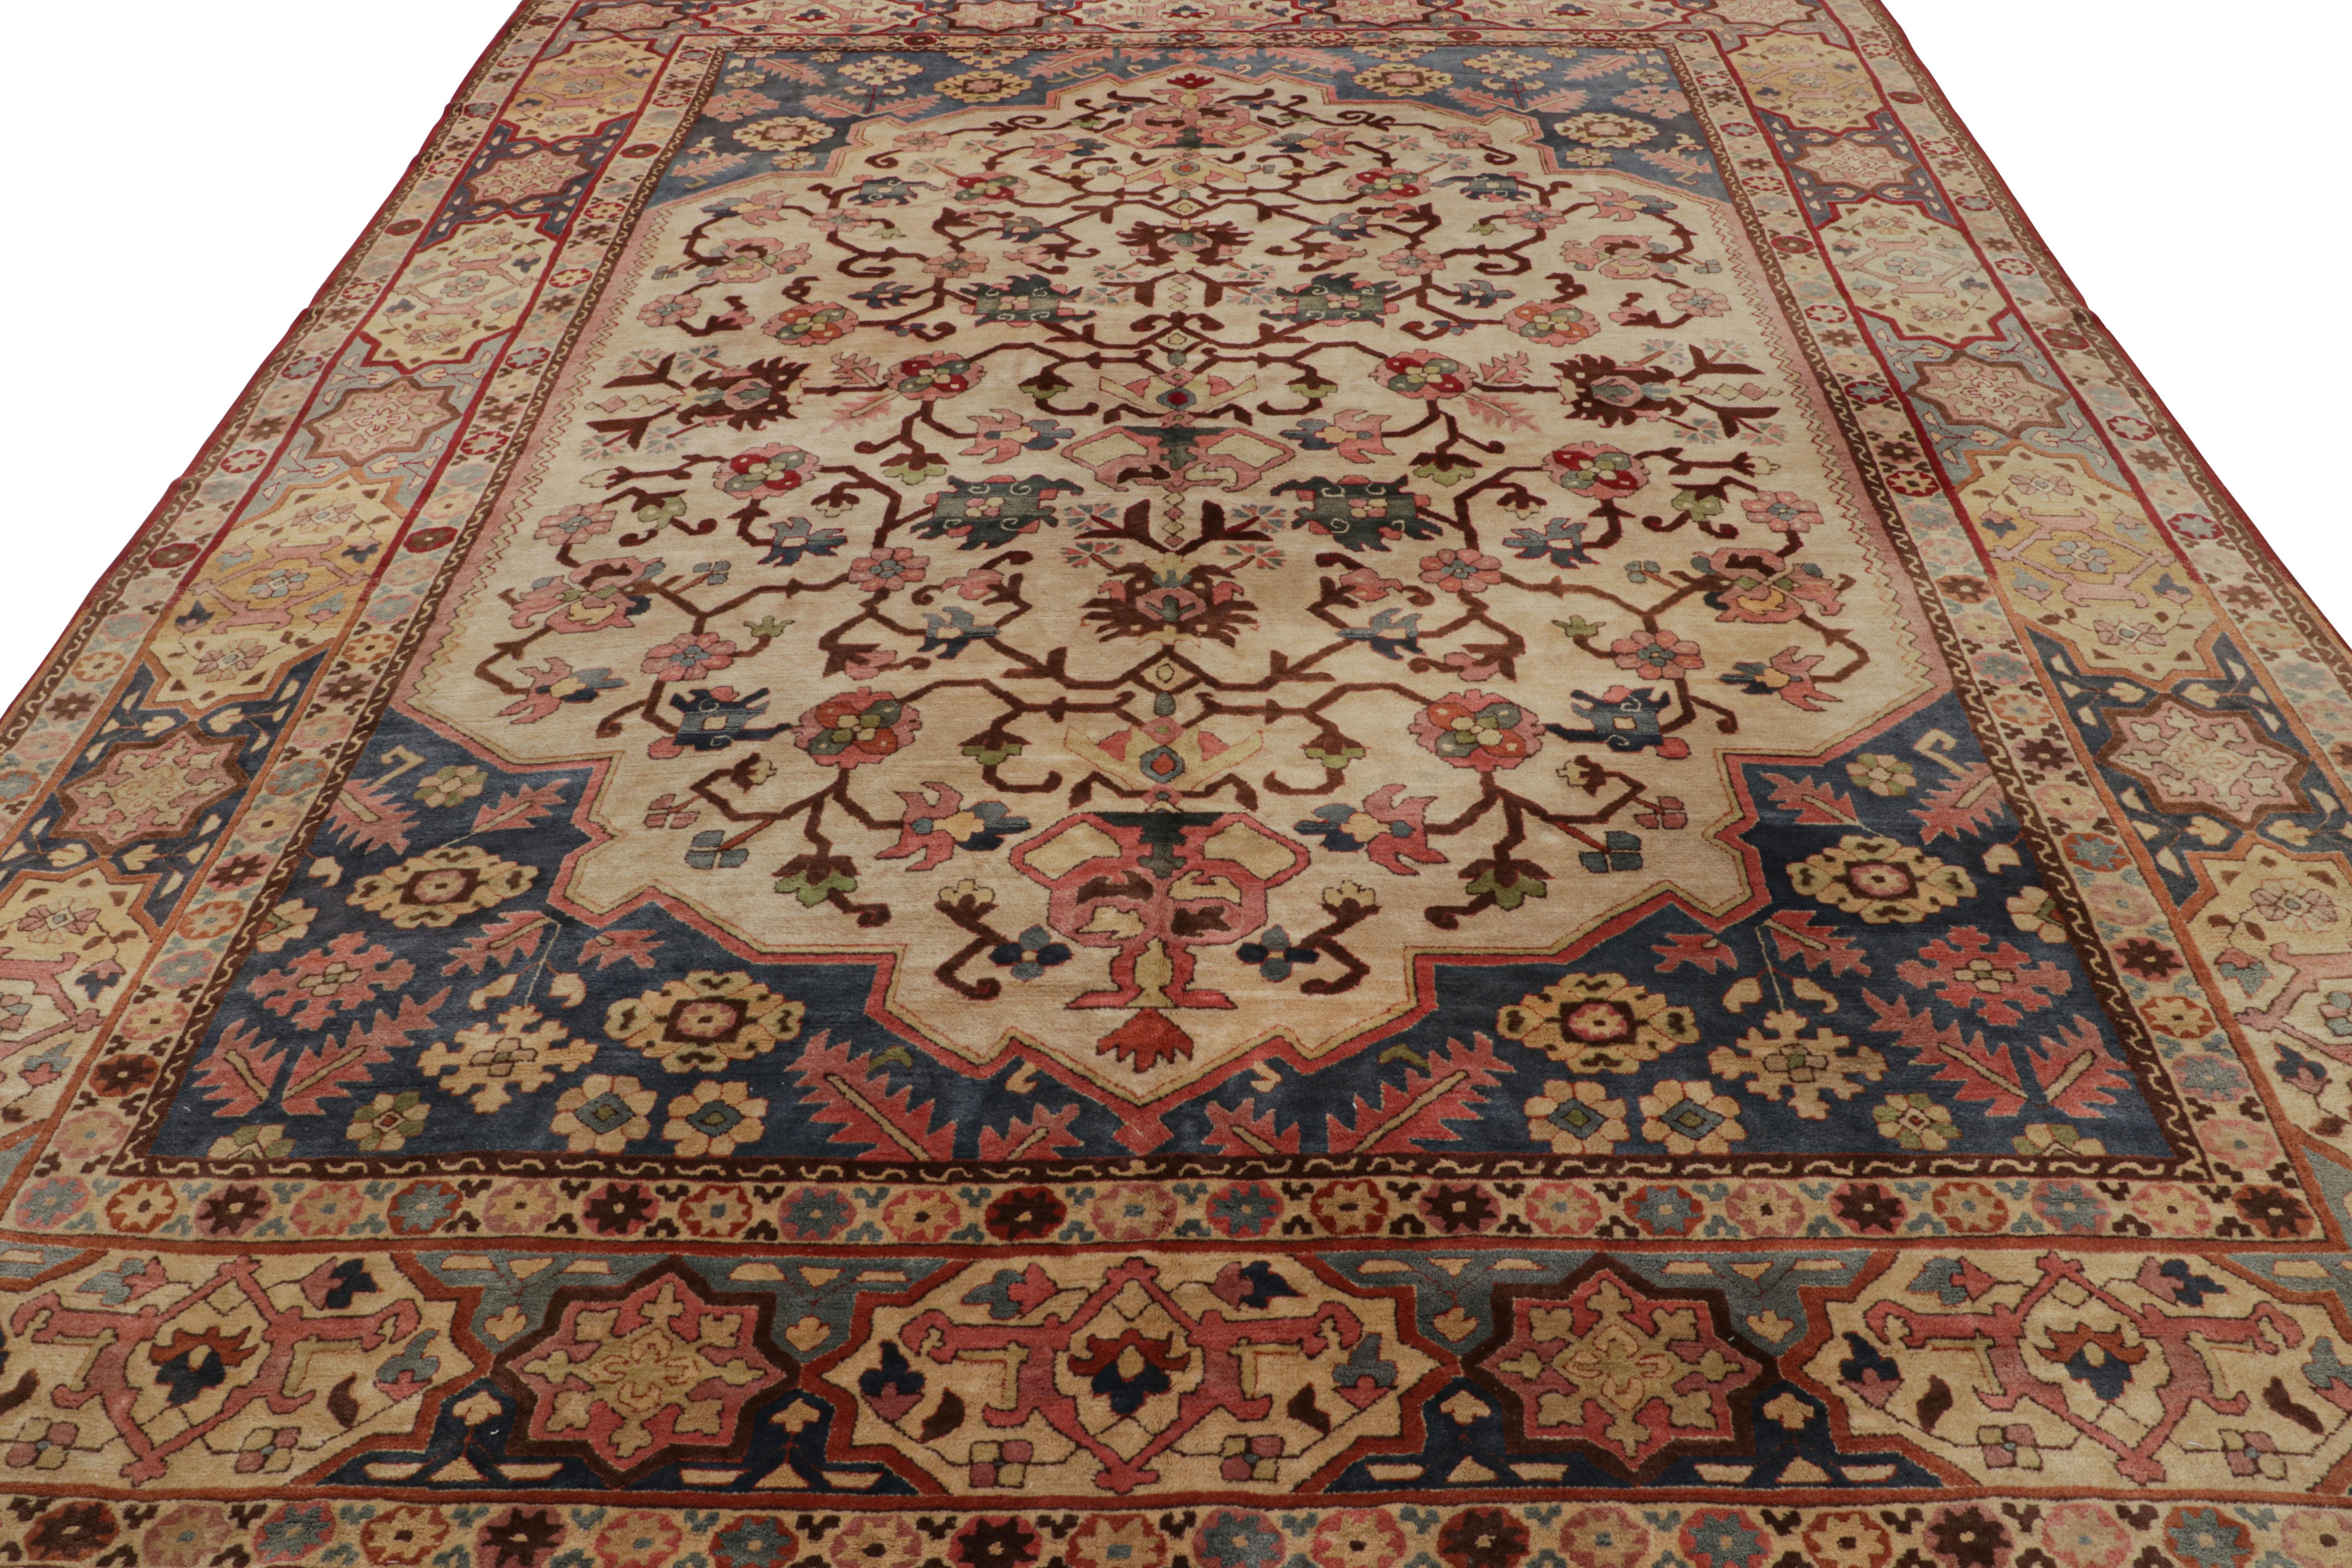 German Antique Hooked Rug in Beige with Floral Patterns, from Rug & Kilim For Sale